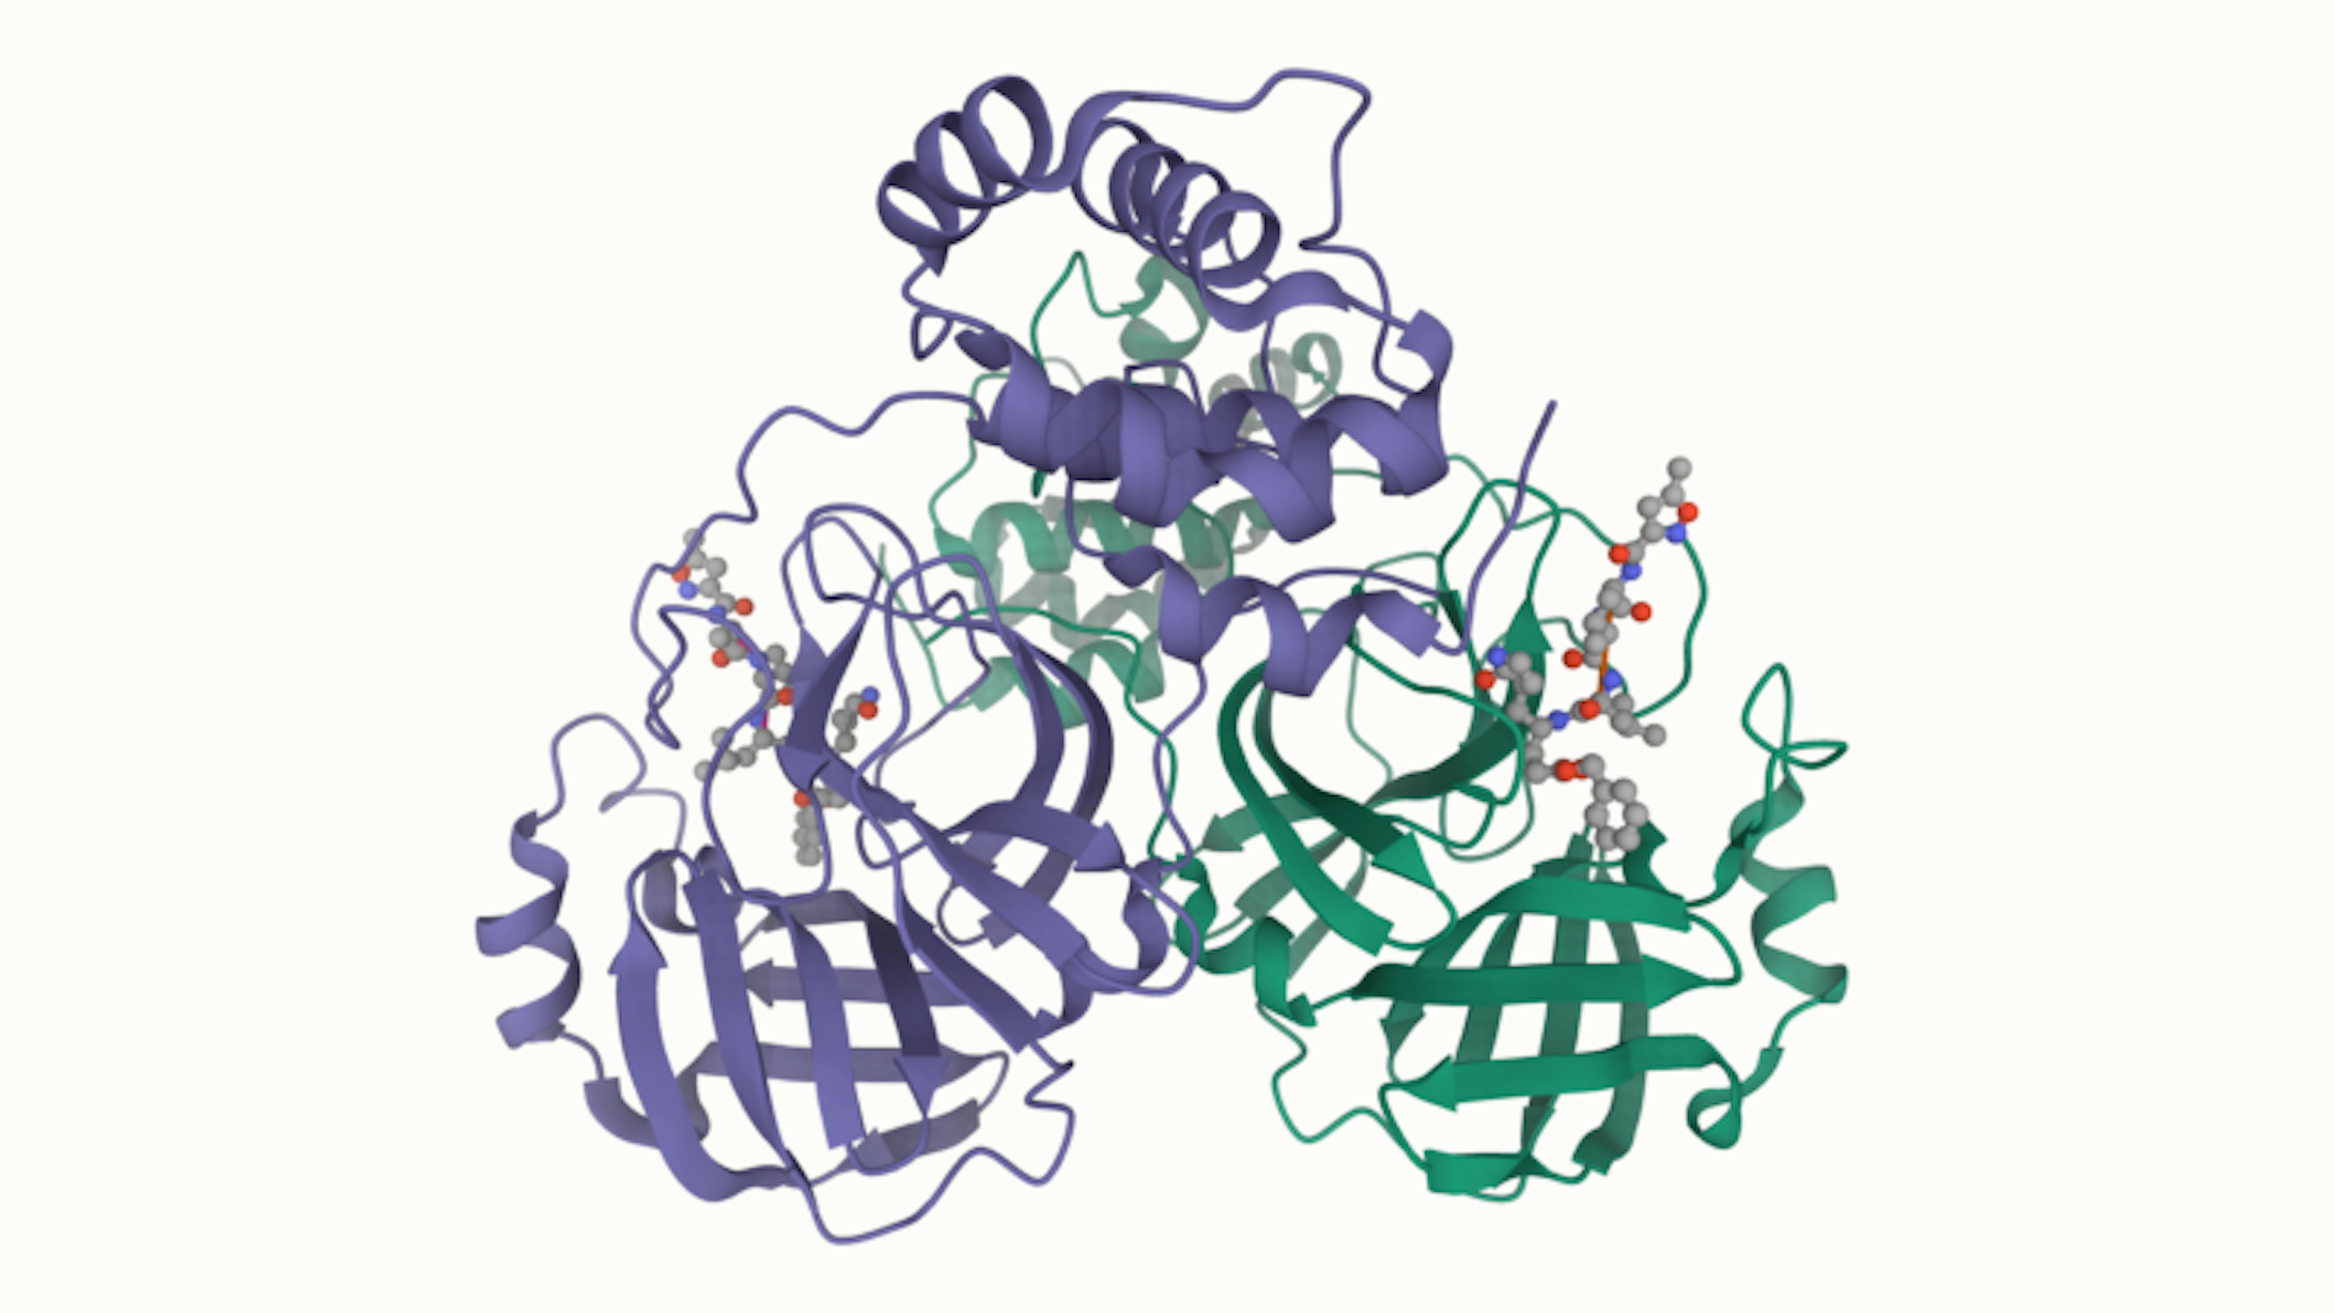 A graphic showing protein folding